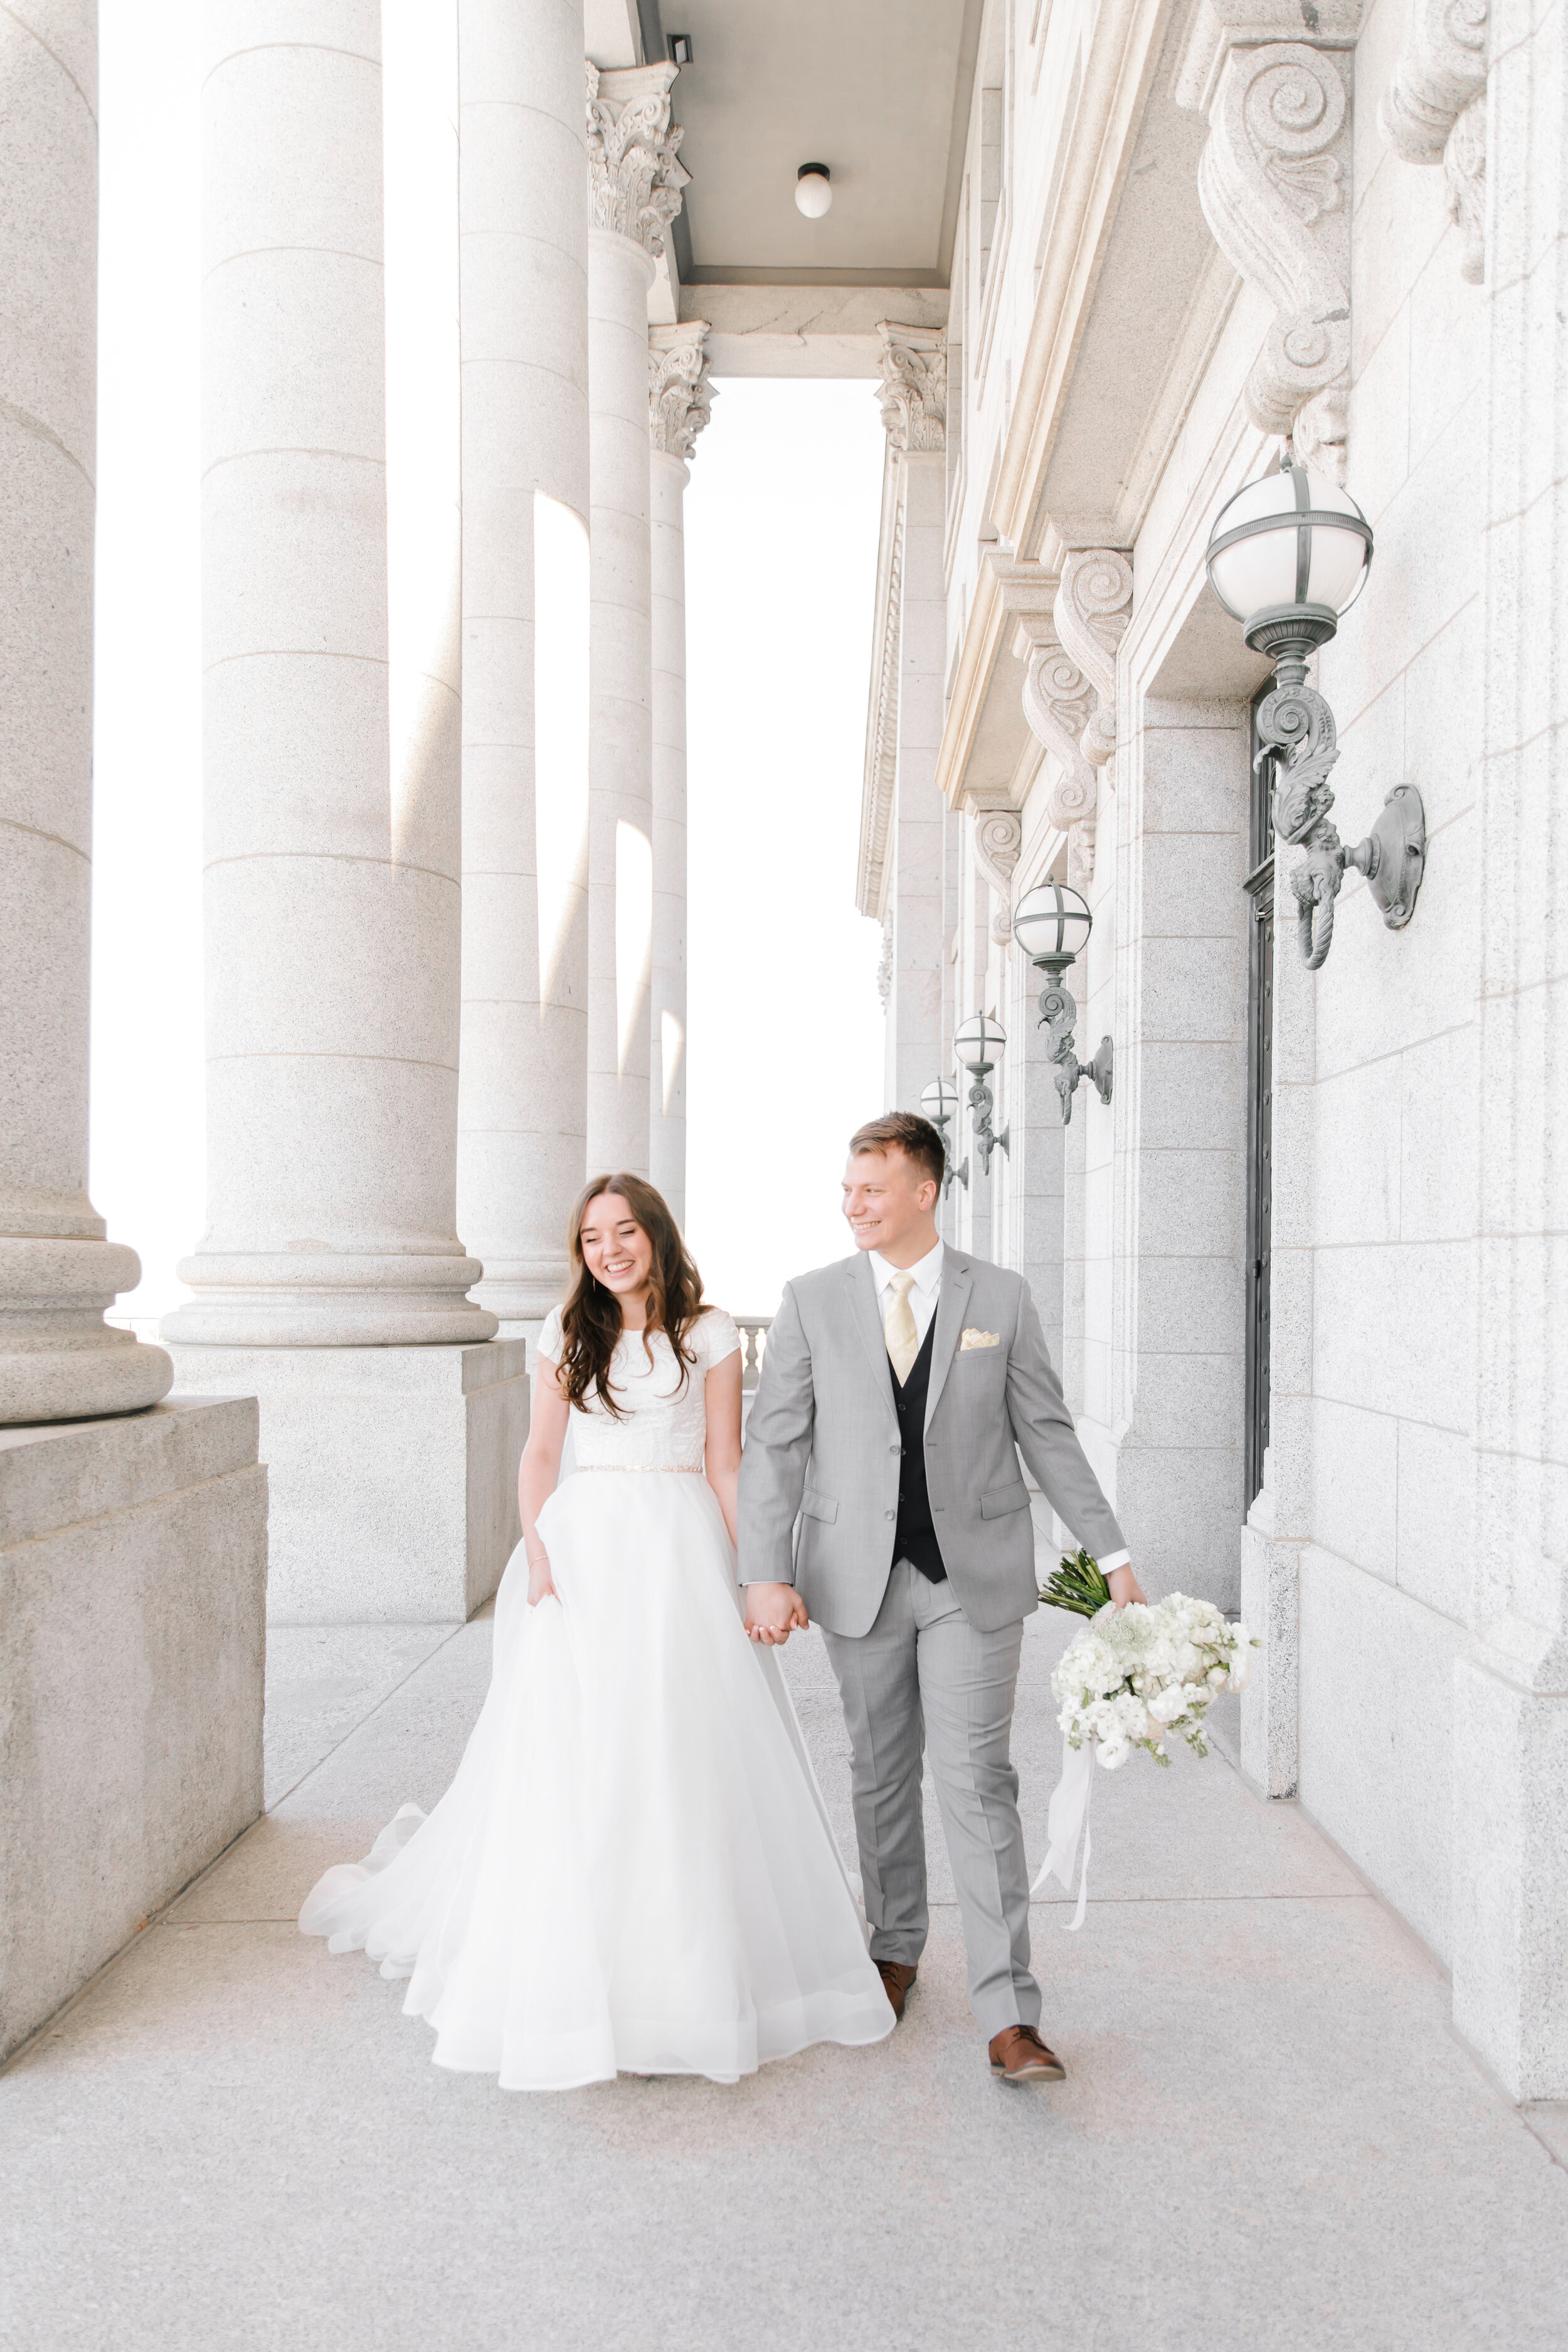  bright and clean sophisticated bridals wedding photography style utah state capitol savanna with clarity lane professional wedding photography available for travel outside of utah modest wedding gown lds wedding photographer 